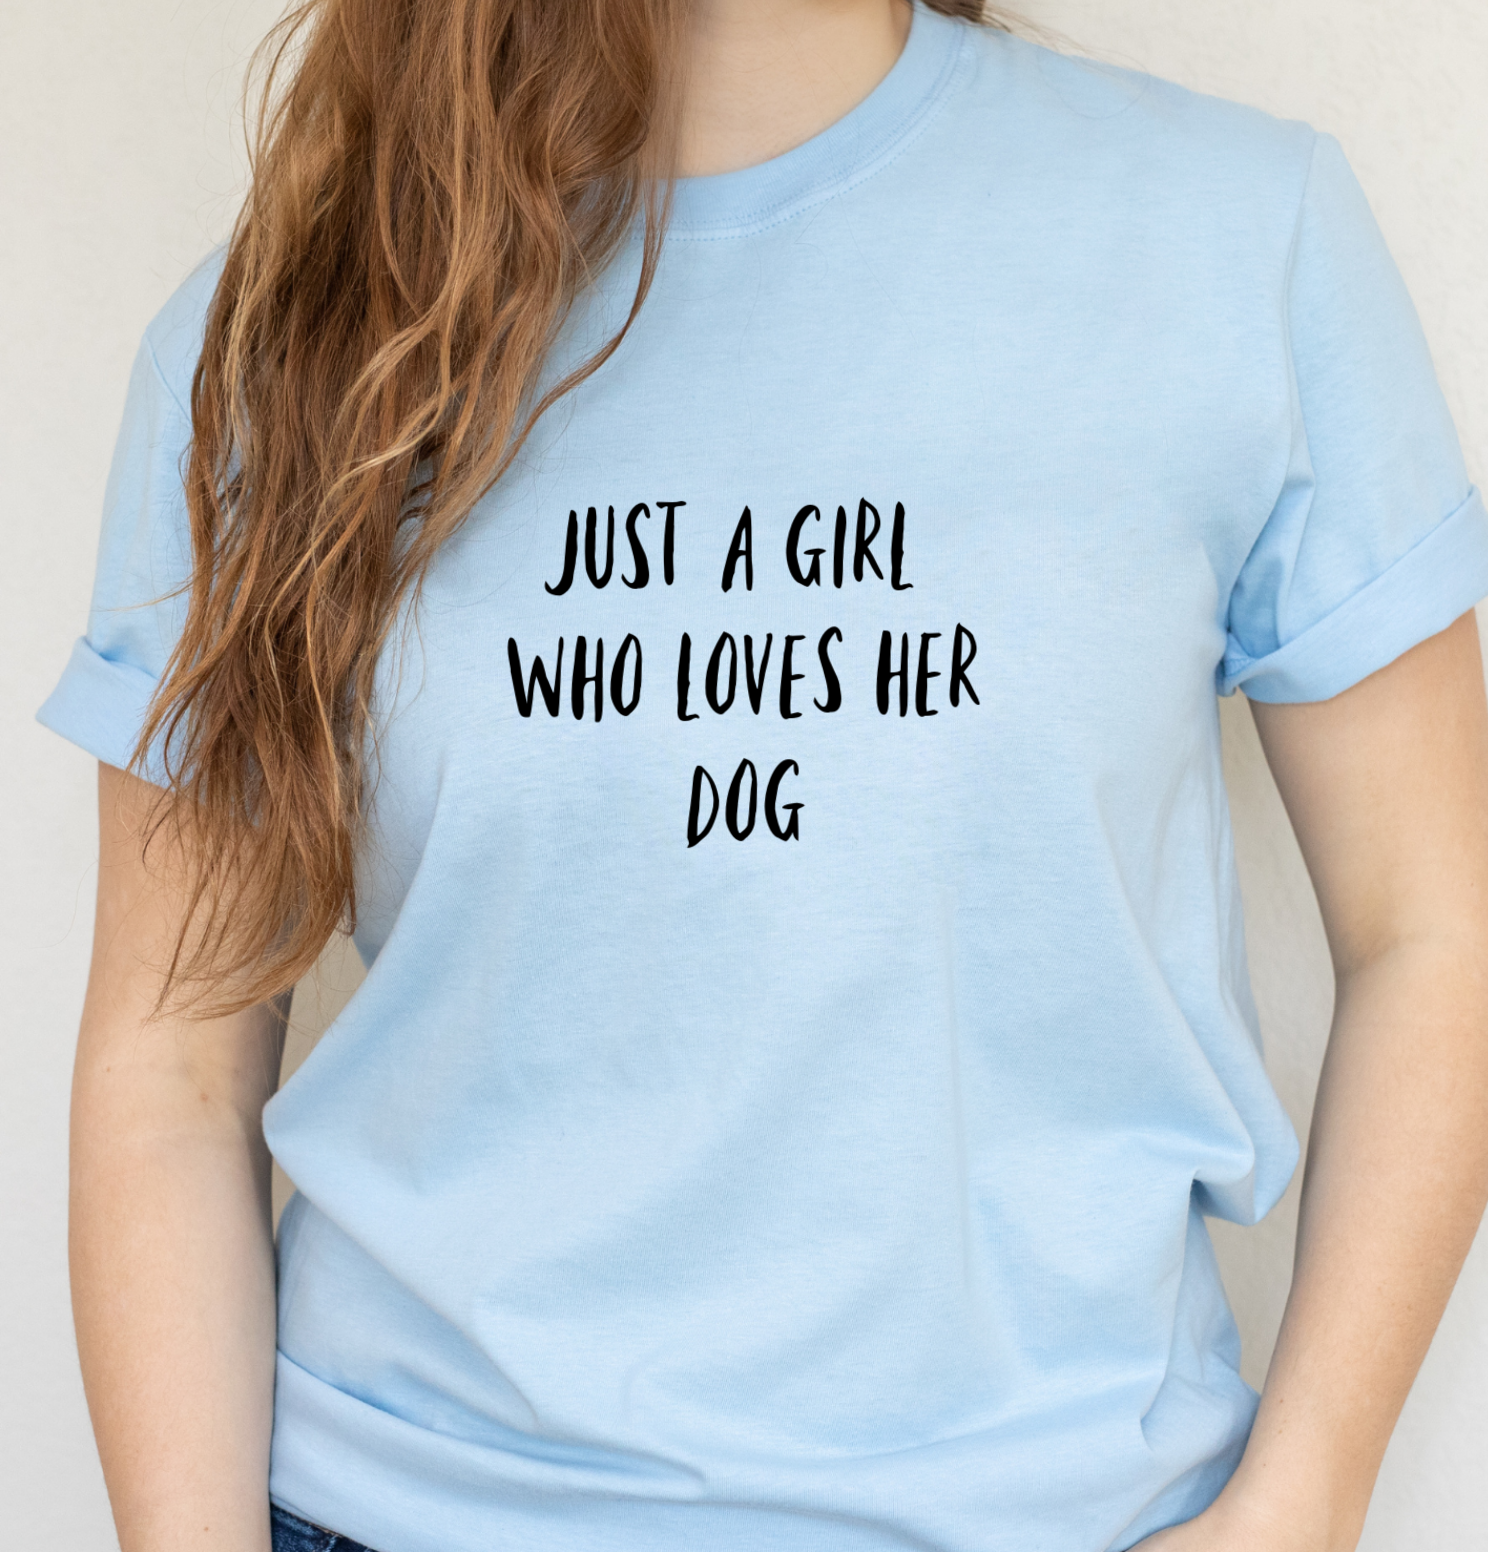 Just a girl who loves her Dog T-shirt - Soft Organic Cotton